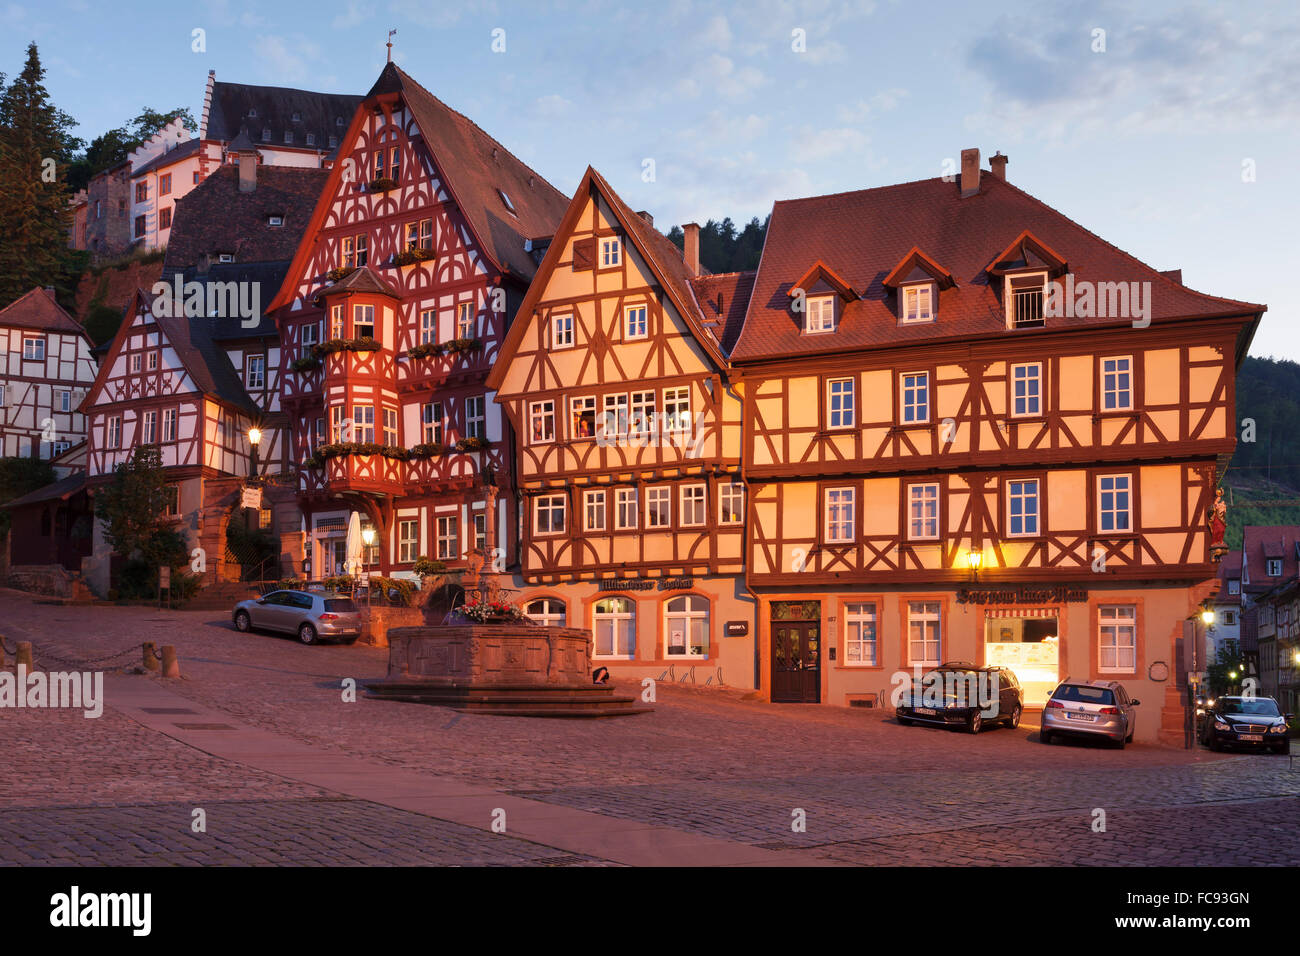 Market Square with half-timbered houses and Mildenburg Castle, old town of Miltenberg, Franconia, Bavaria, Germany, Europe Stock Photo